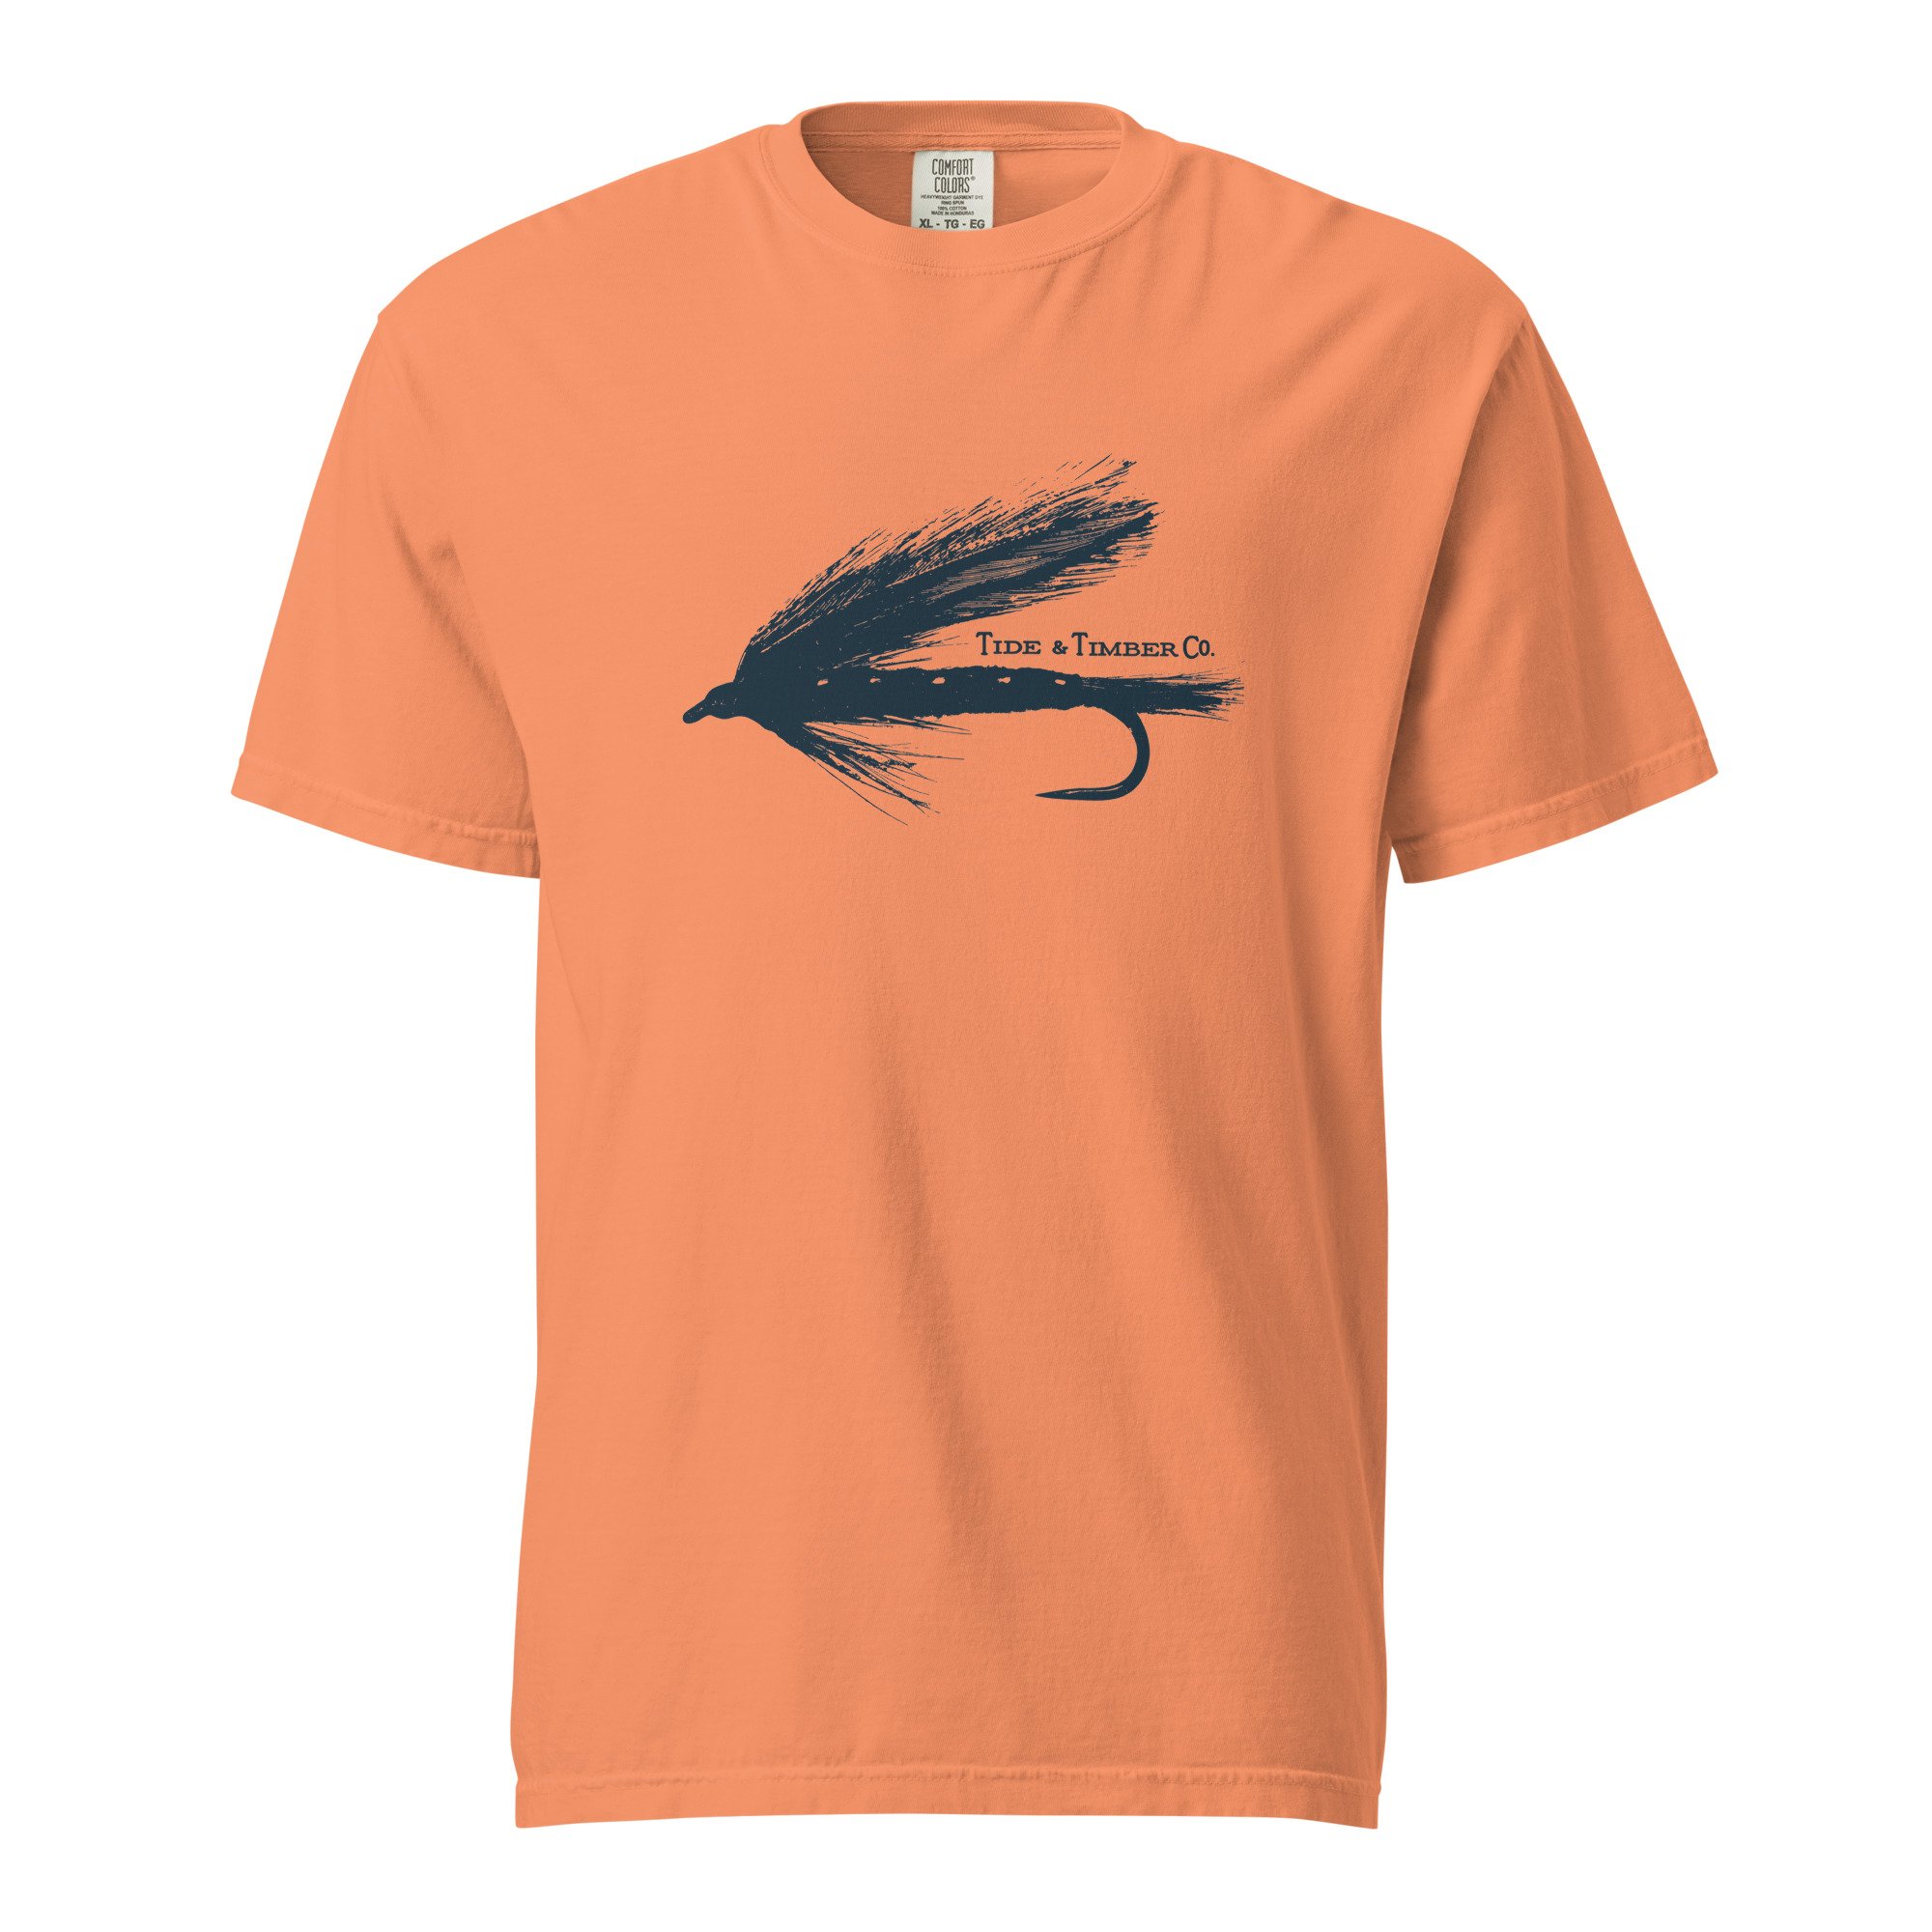 Tide & Timber Co. Black Ghost Fly Fishing - Unisex garment-dyed heavyweight  t-shirt